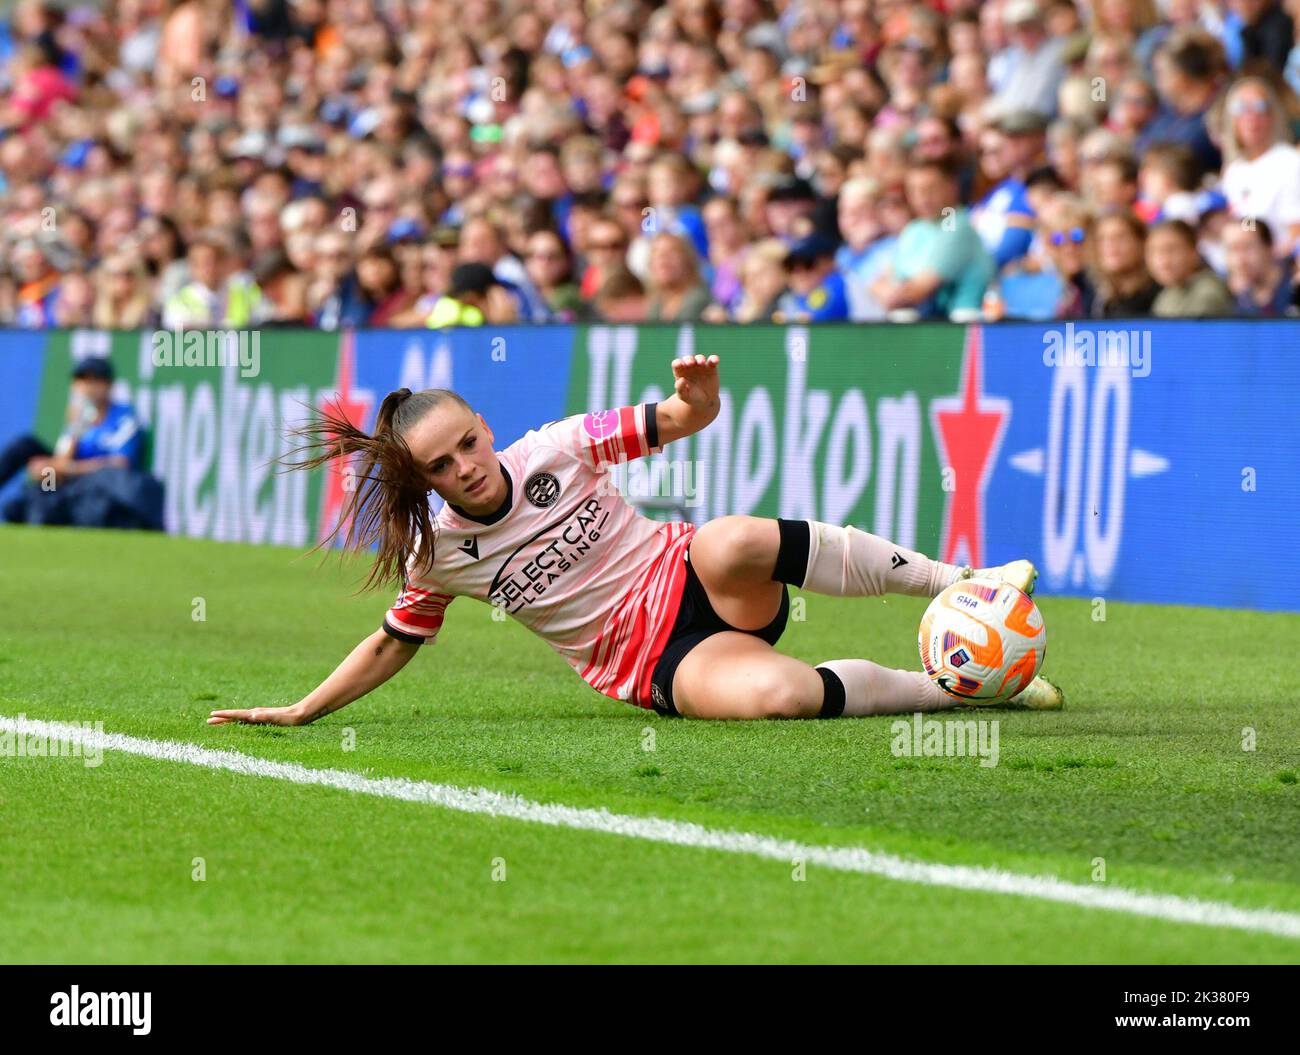 Brighton And Hove, UK. 25th Sep, 2022. Rachel Rowe of Reading is unable to keep the ball in play during the FA Women's Super League match between Brighton & Hove Albion Women and Reading Women at American Express Community Stadium on September 25th 2022 in Brighton and Hove, United Kingdom. (Photo by Jeff Mood/phcimages.com) Credit: PHC Images/Alamy Live News Stock Photo